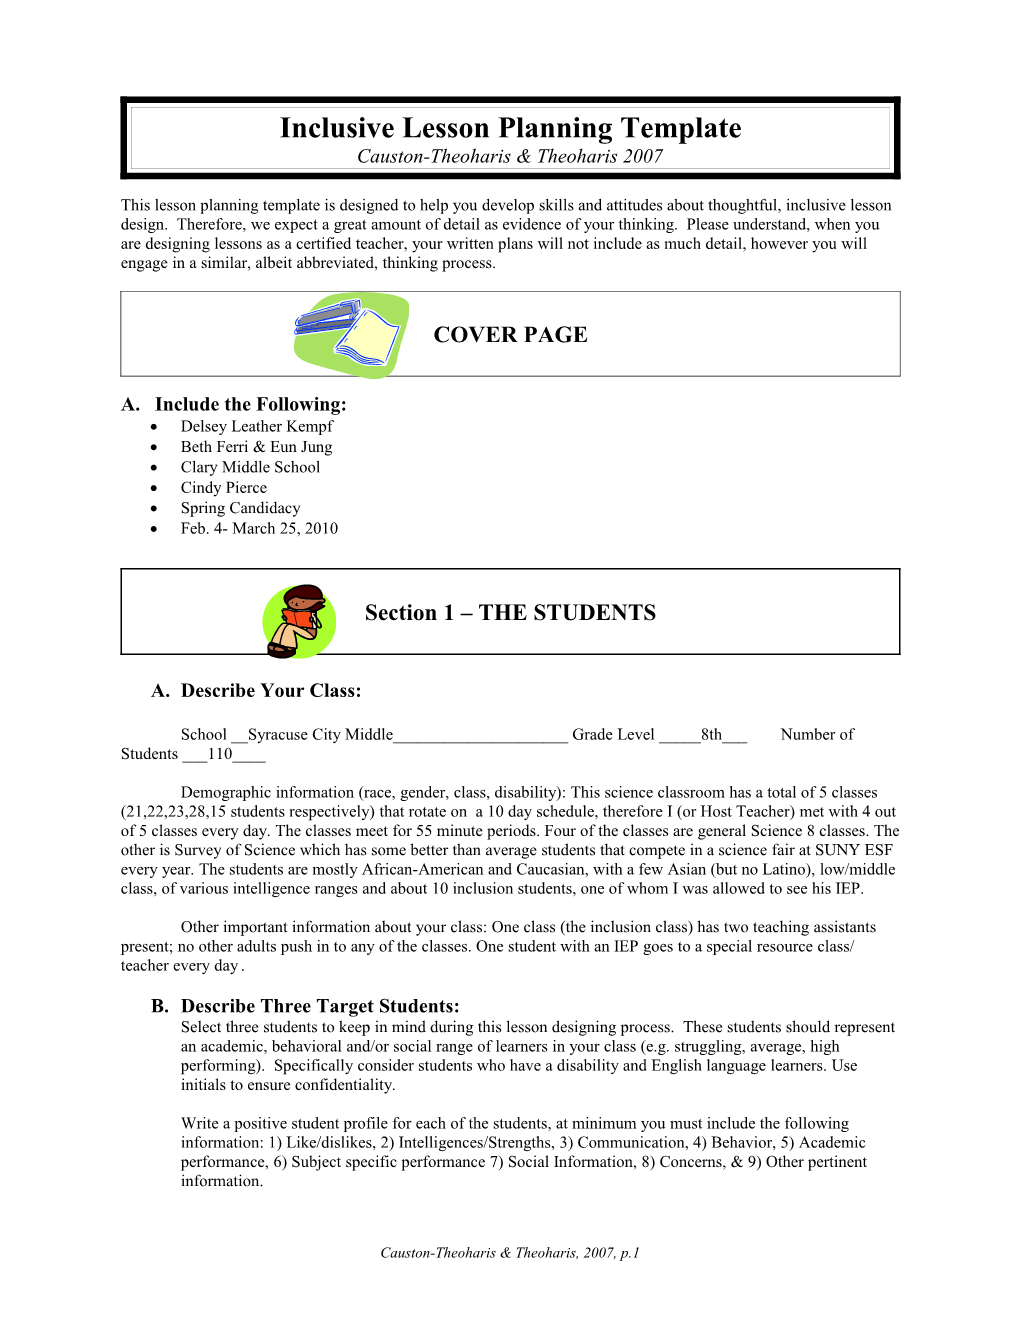 Inclusive Lesson Planning Template